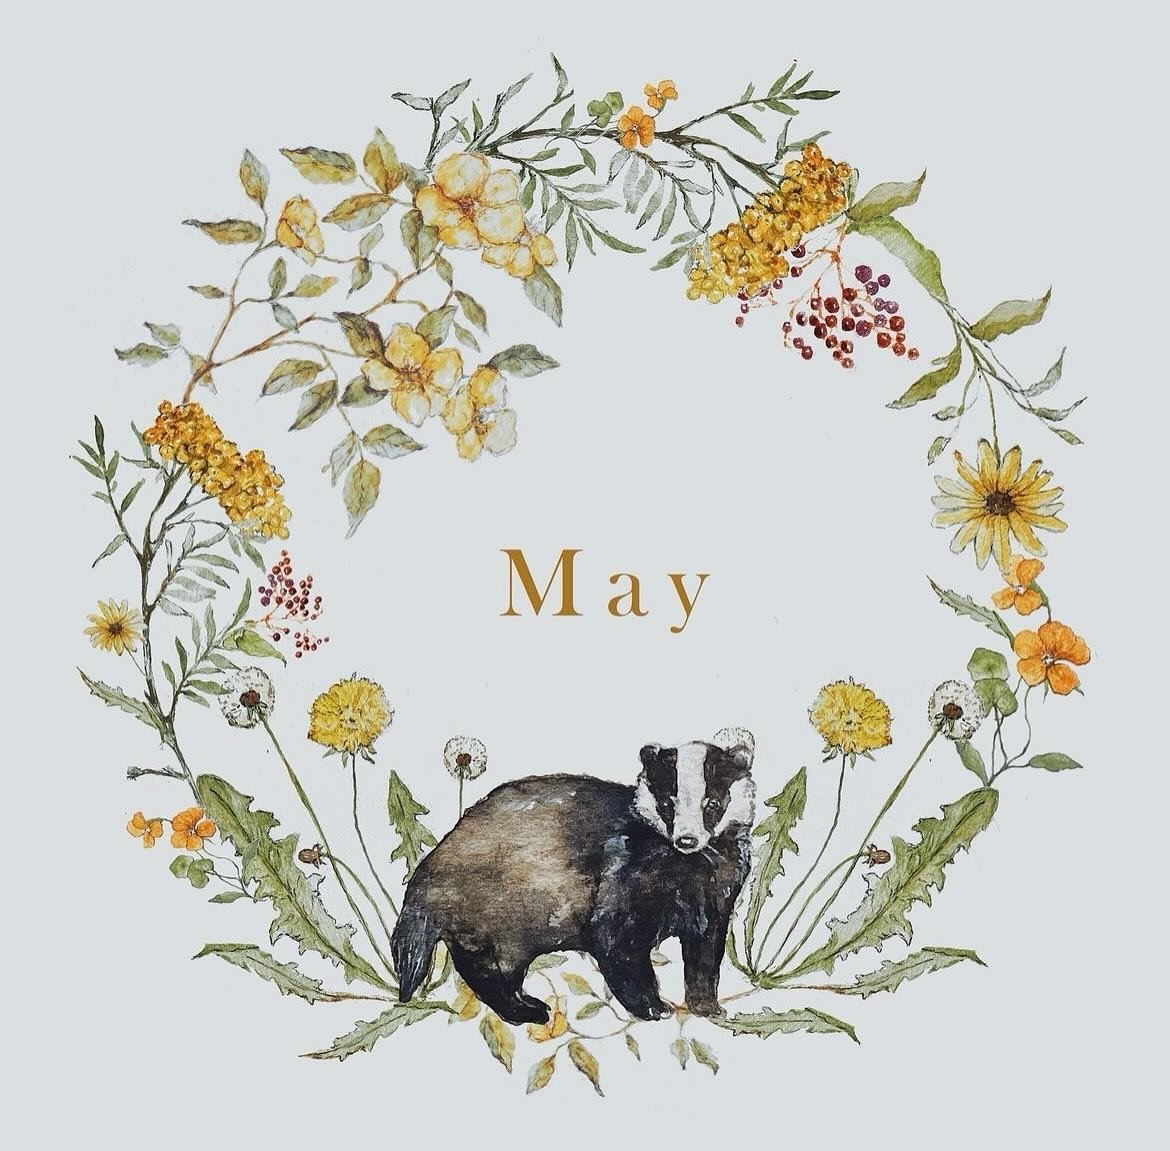 May 🦋
The season of blooming, herbal medicine making, and the return of yang energy after a long period of yin.

What have these warmers days, stronger rays, and lilac smells riding on the wind brought up within you? What intentions are you setting 